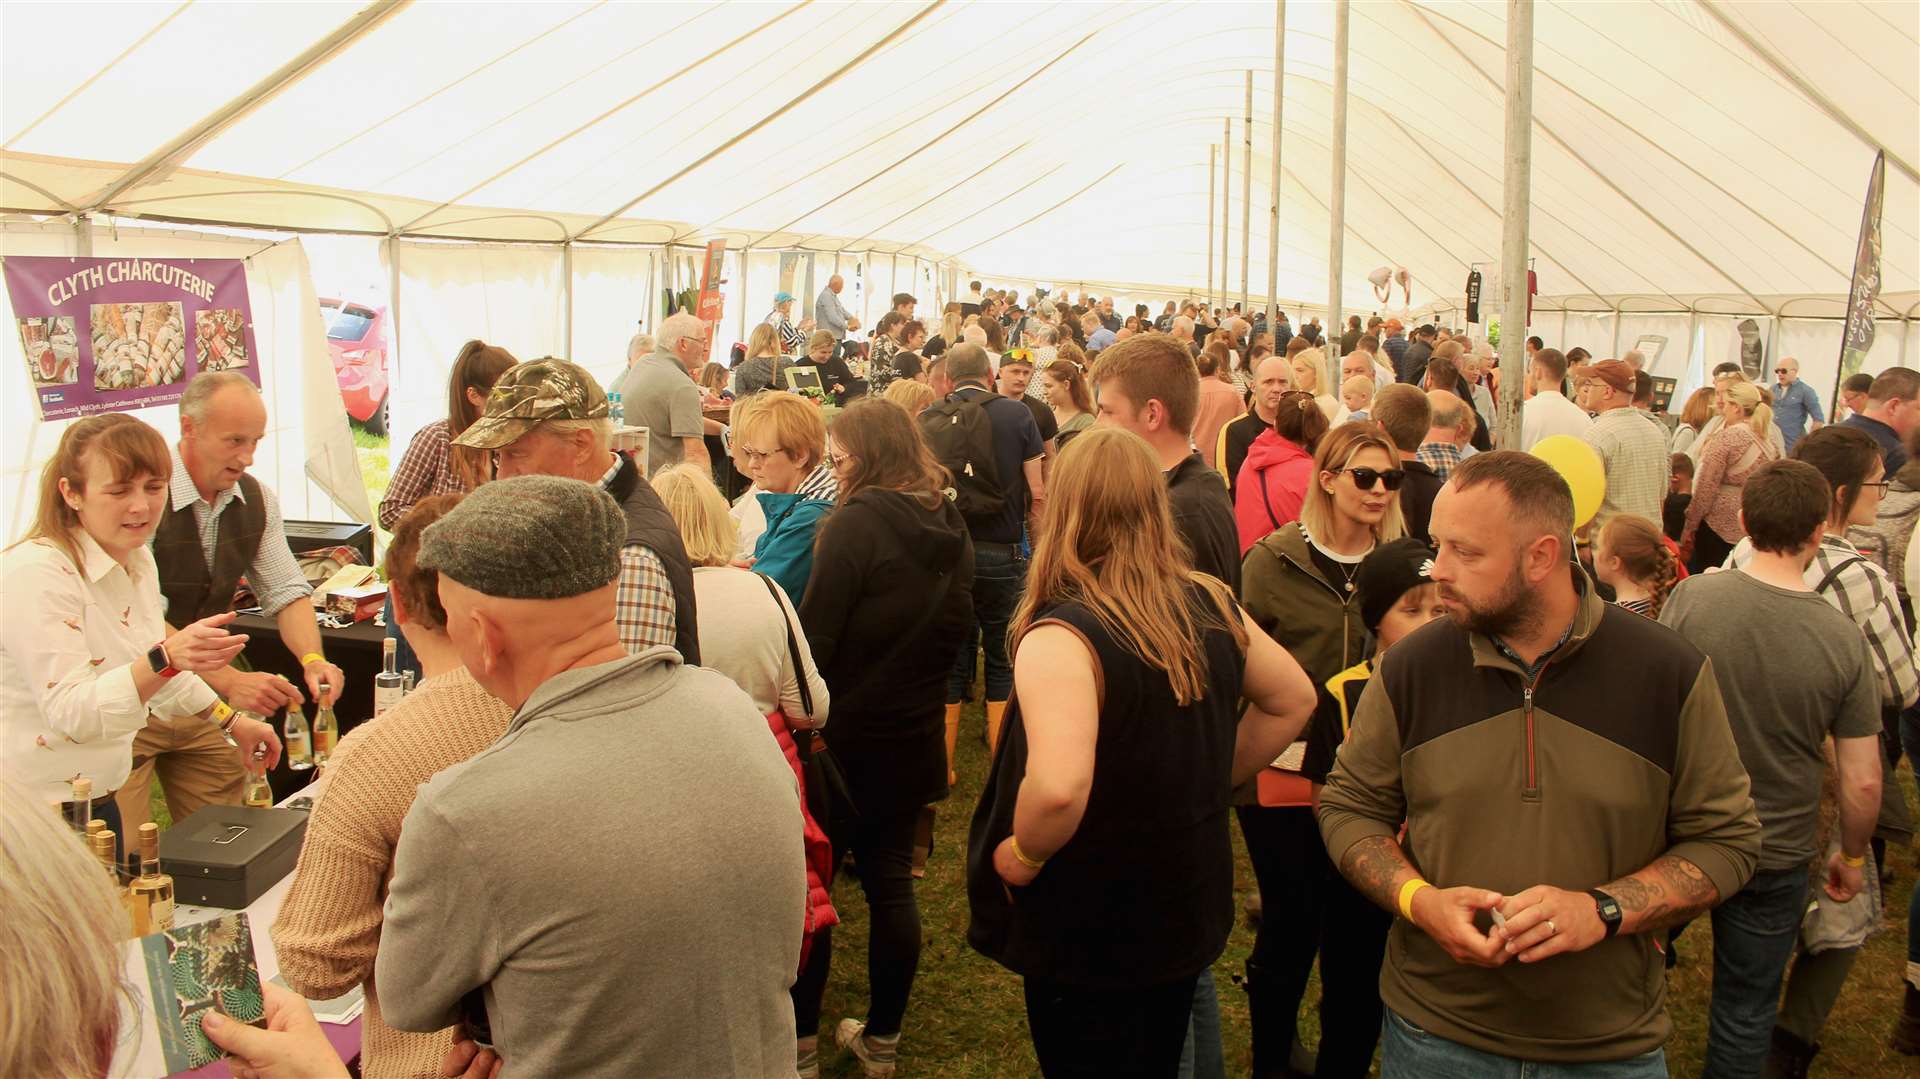 A busy scene in the Northern Quality Produce marquee. Picture: Alan Hendry